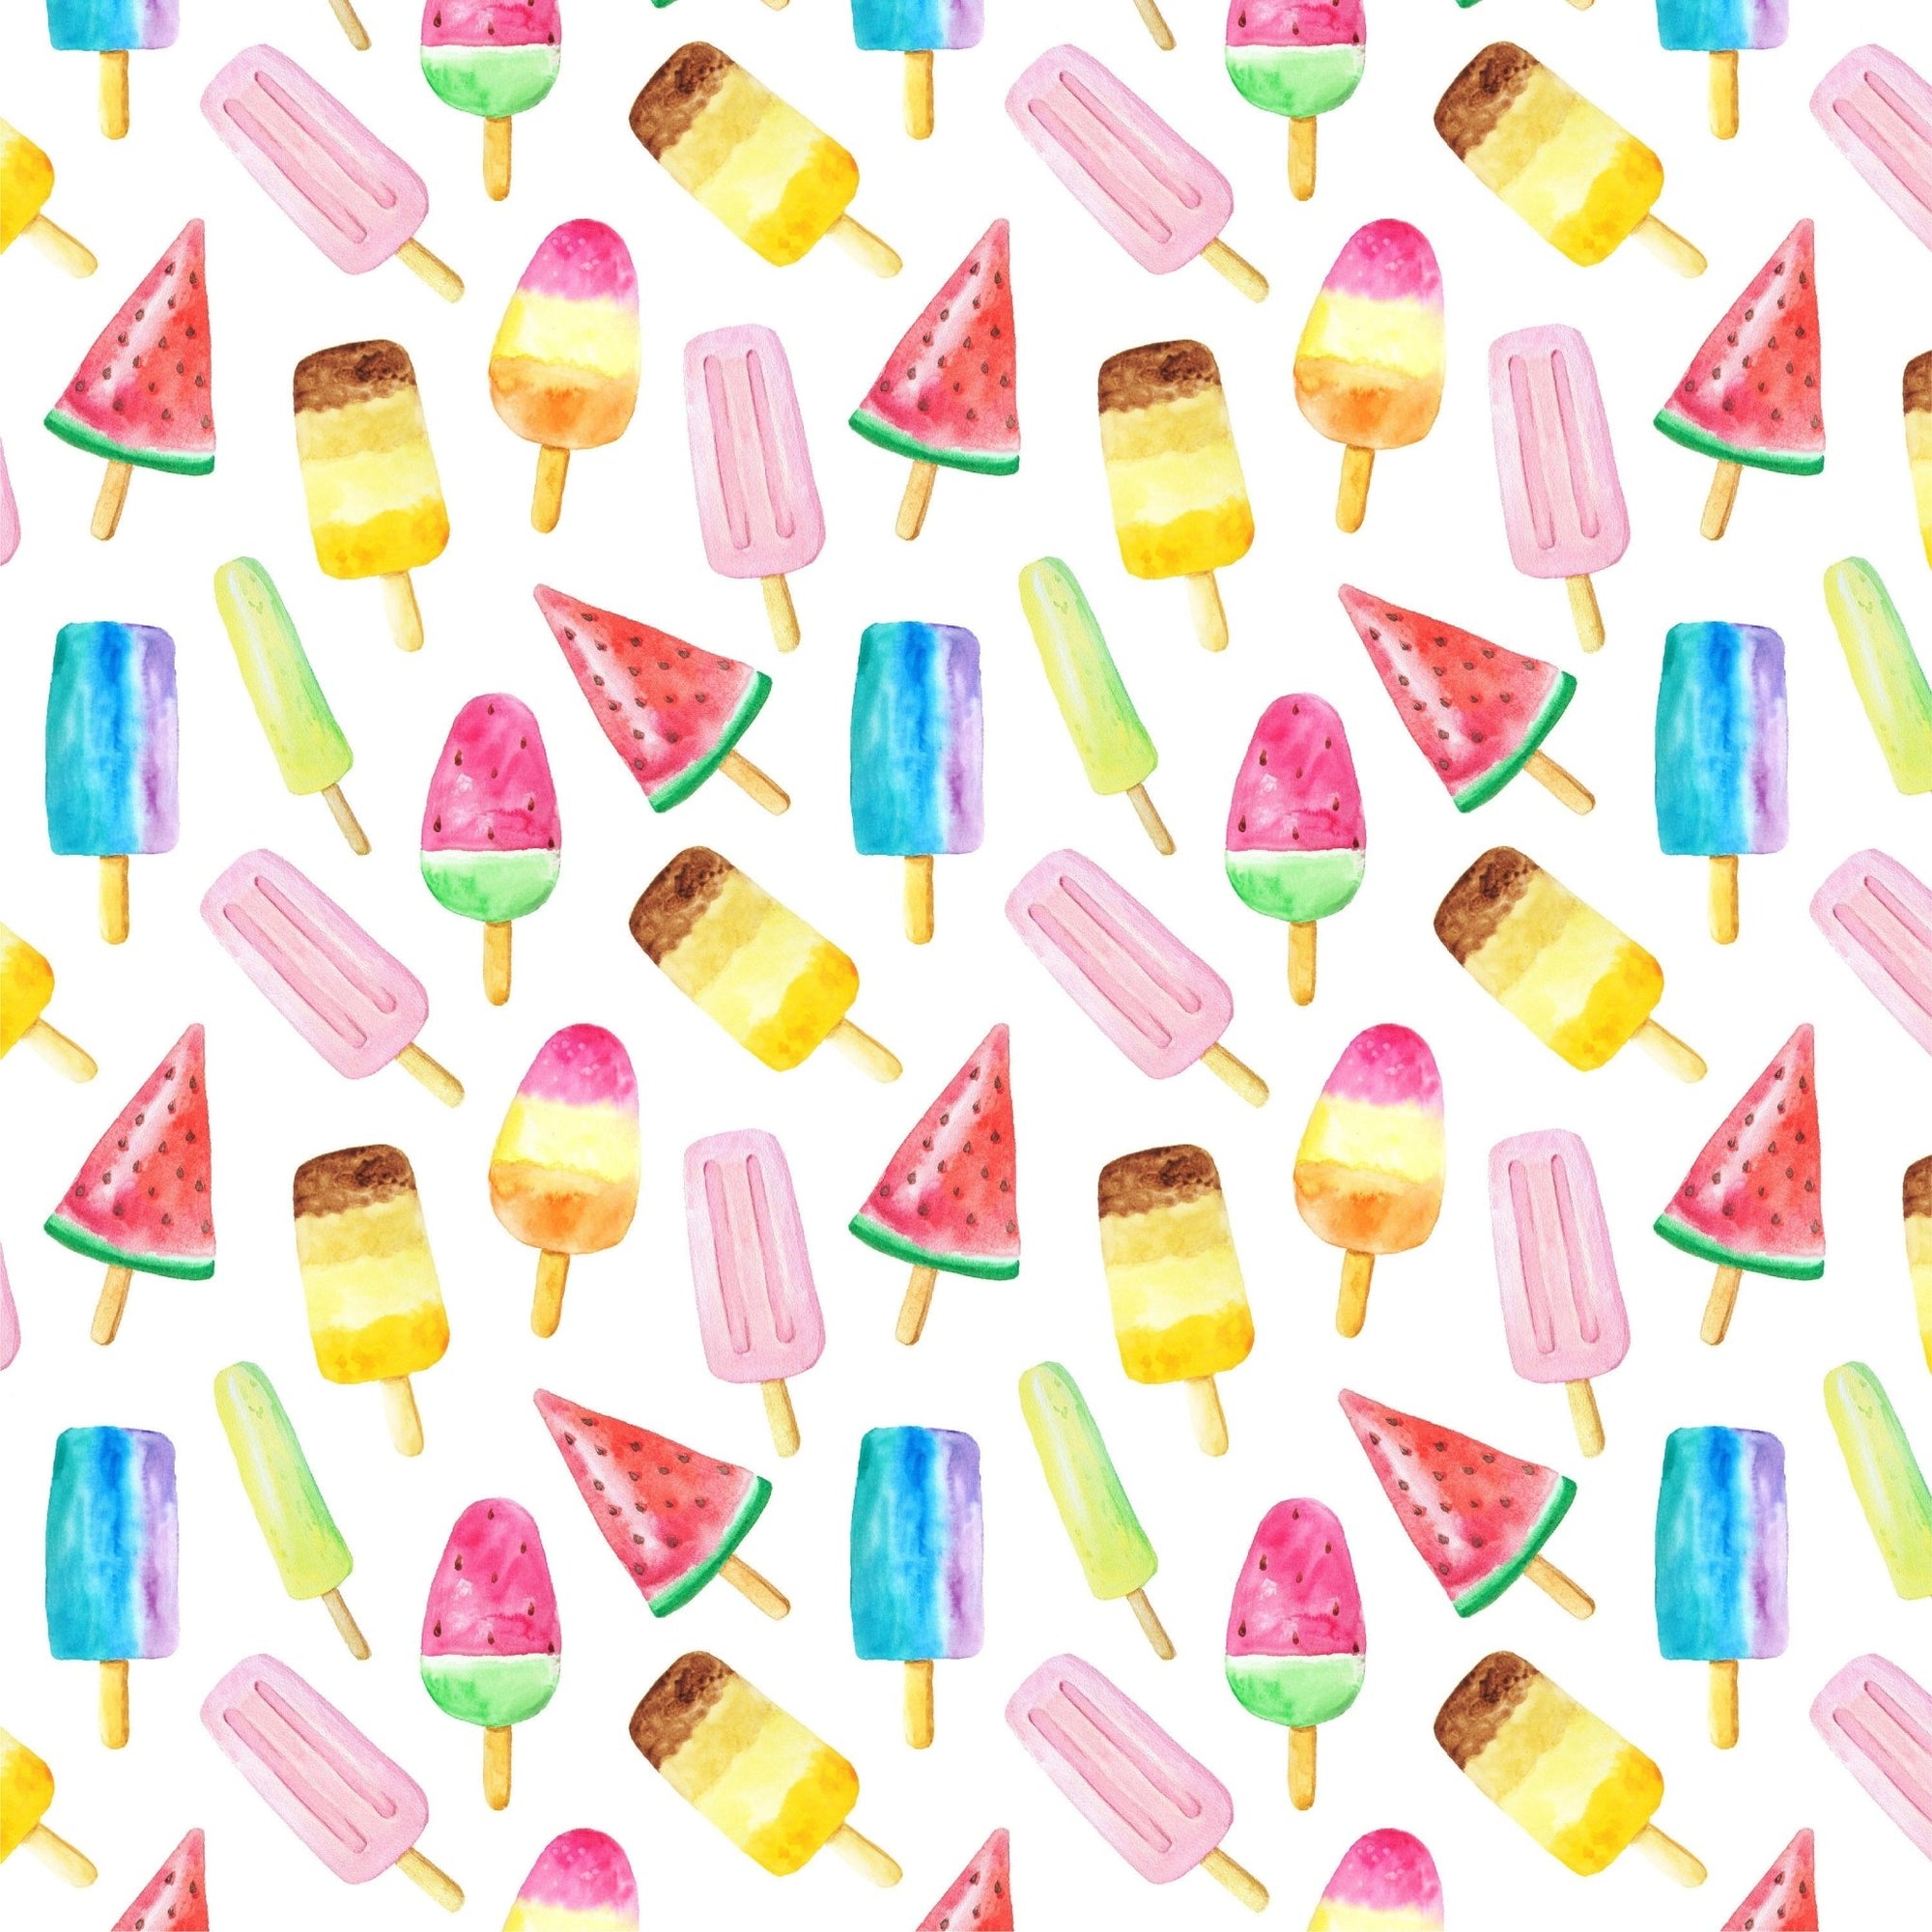 Popsicle Wrapping Paper - Stesha Party